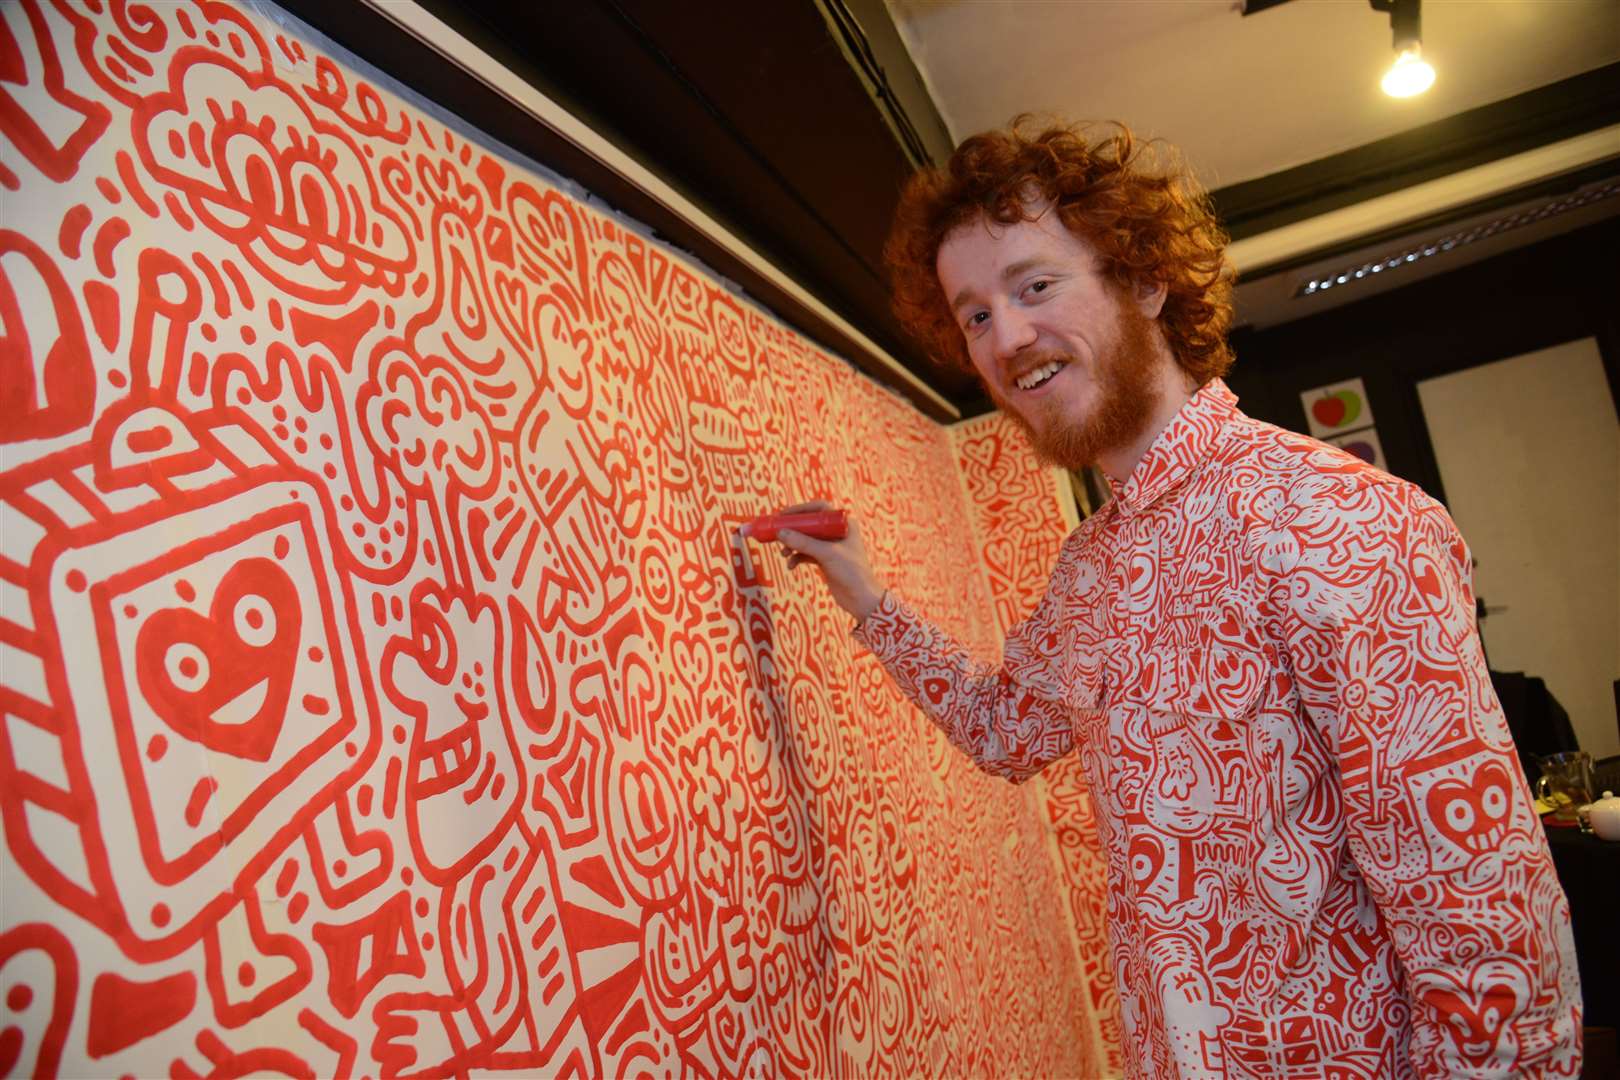 Mr Doodle's work has been exhibited as far afield as Rome and Seoul